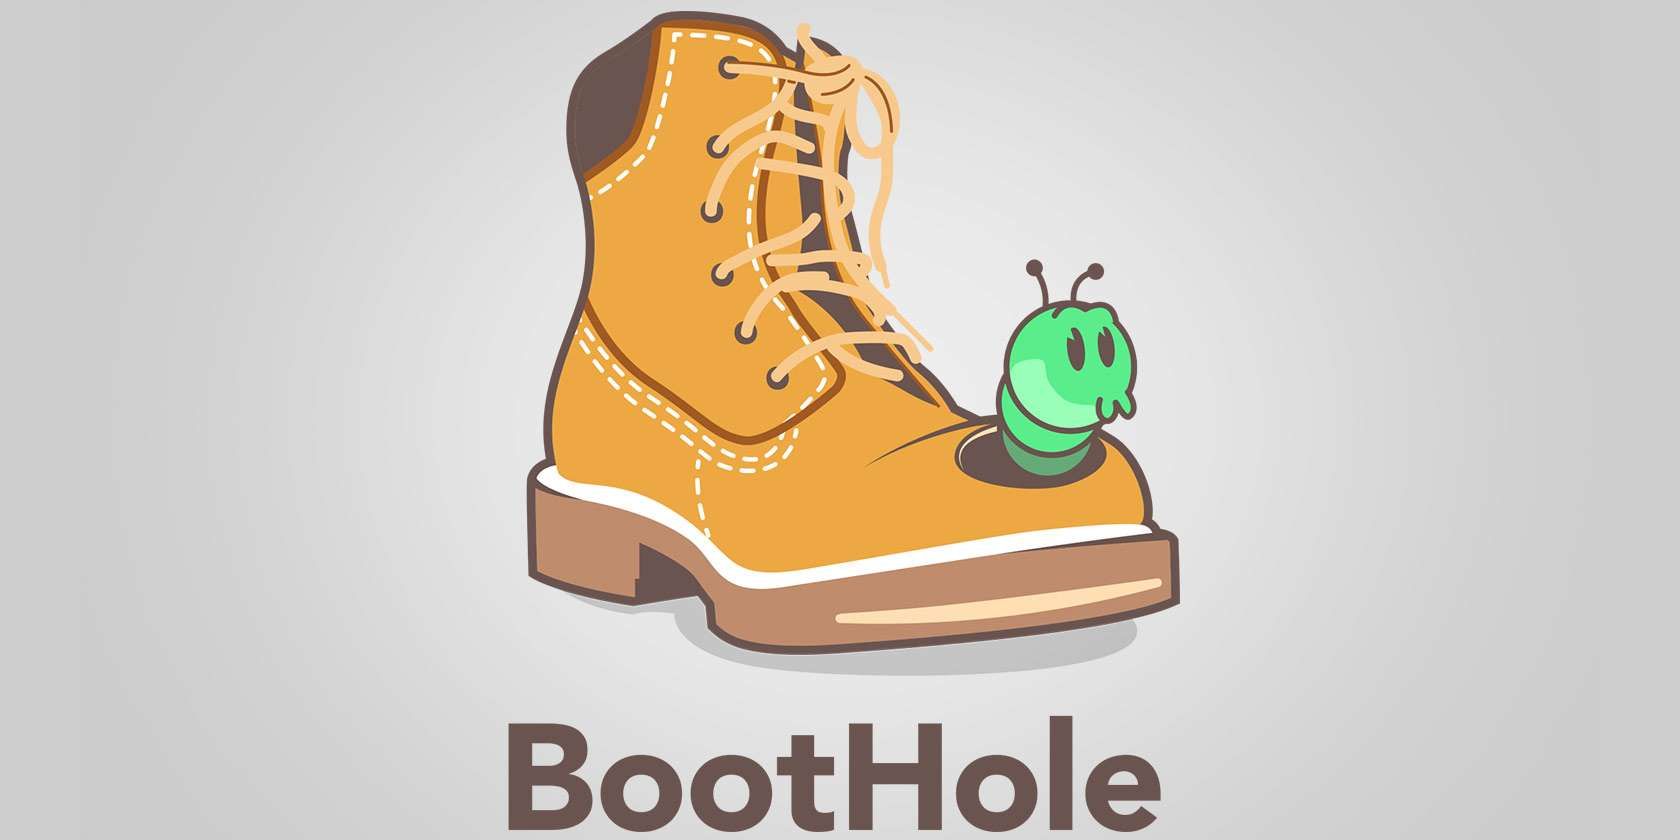 The official graphic for BootHole